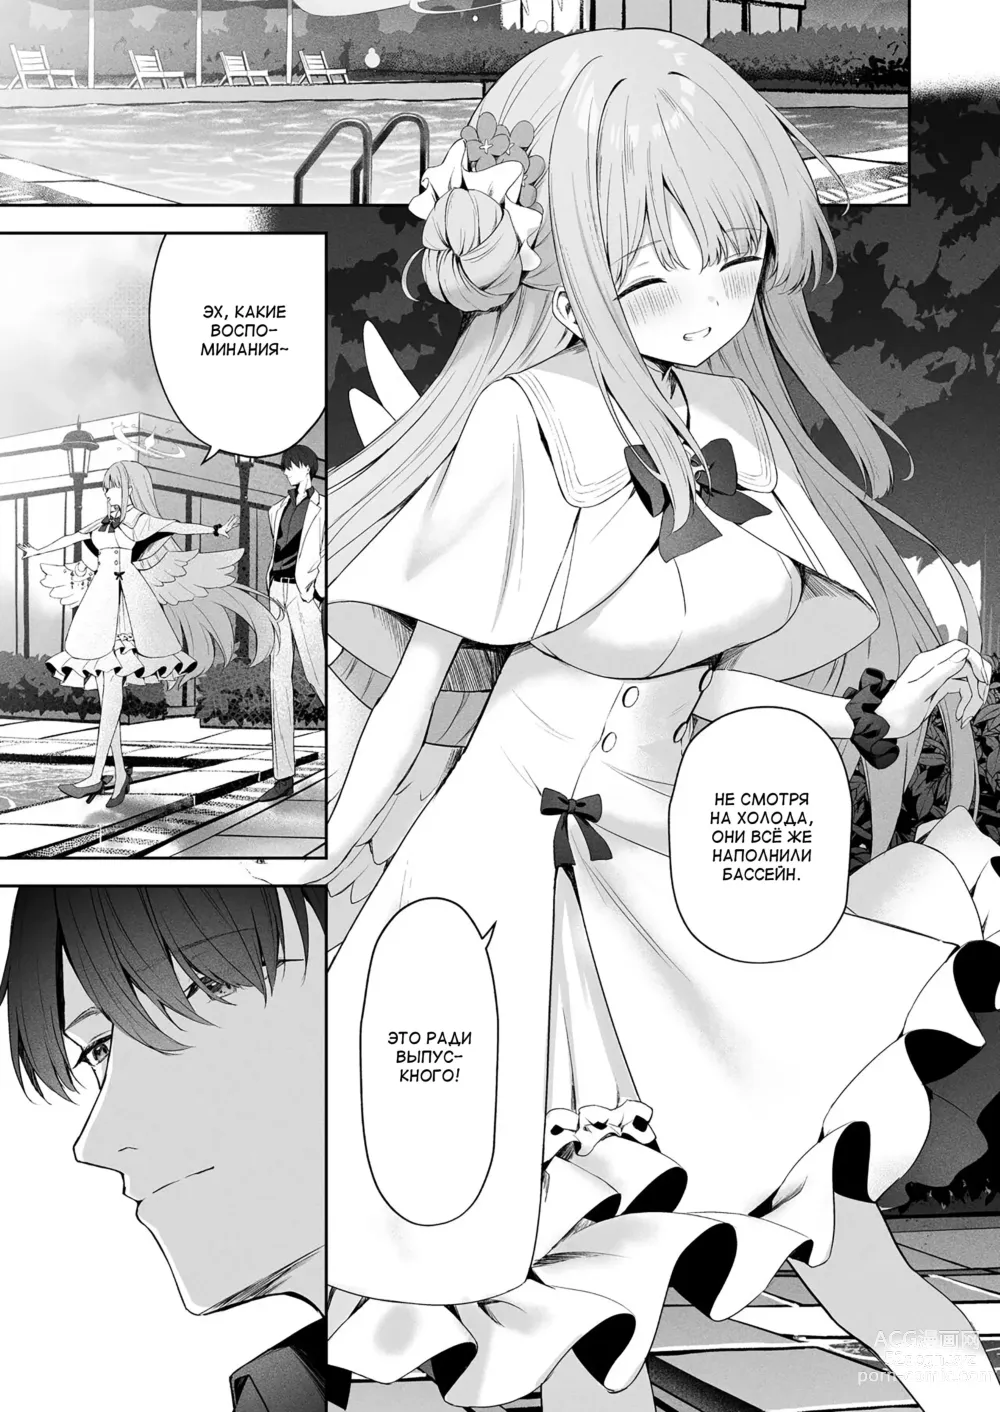 Page 2 of doujinshi Daydream kara Samete - THE END OF DAYDREAMING